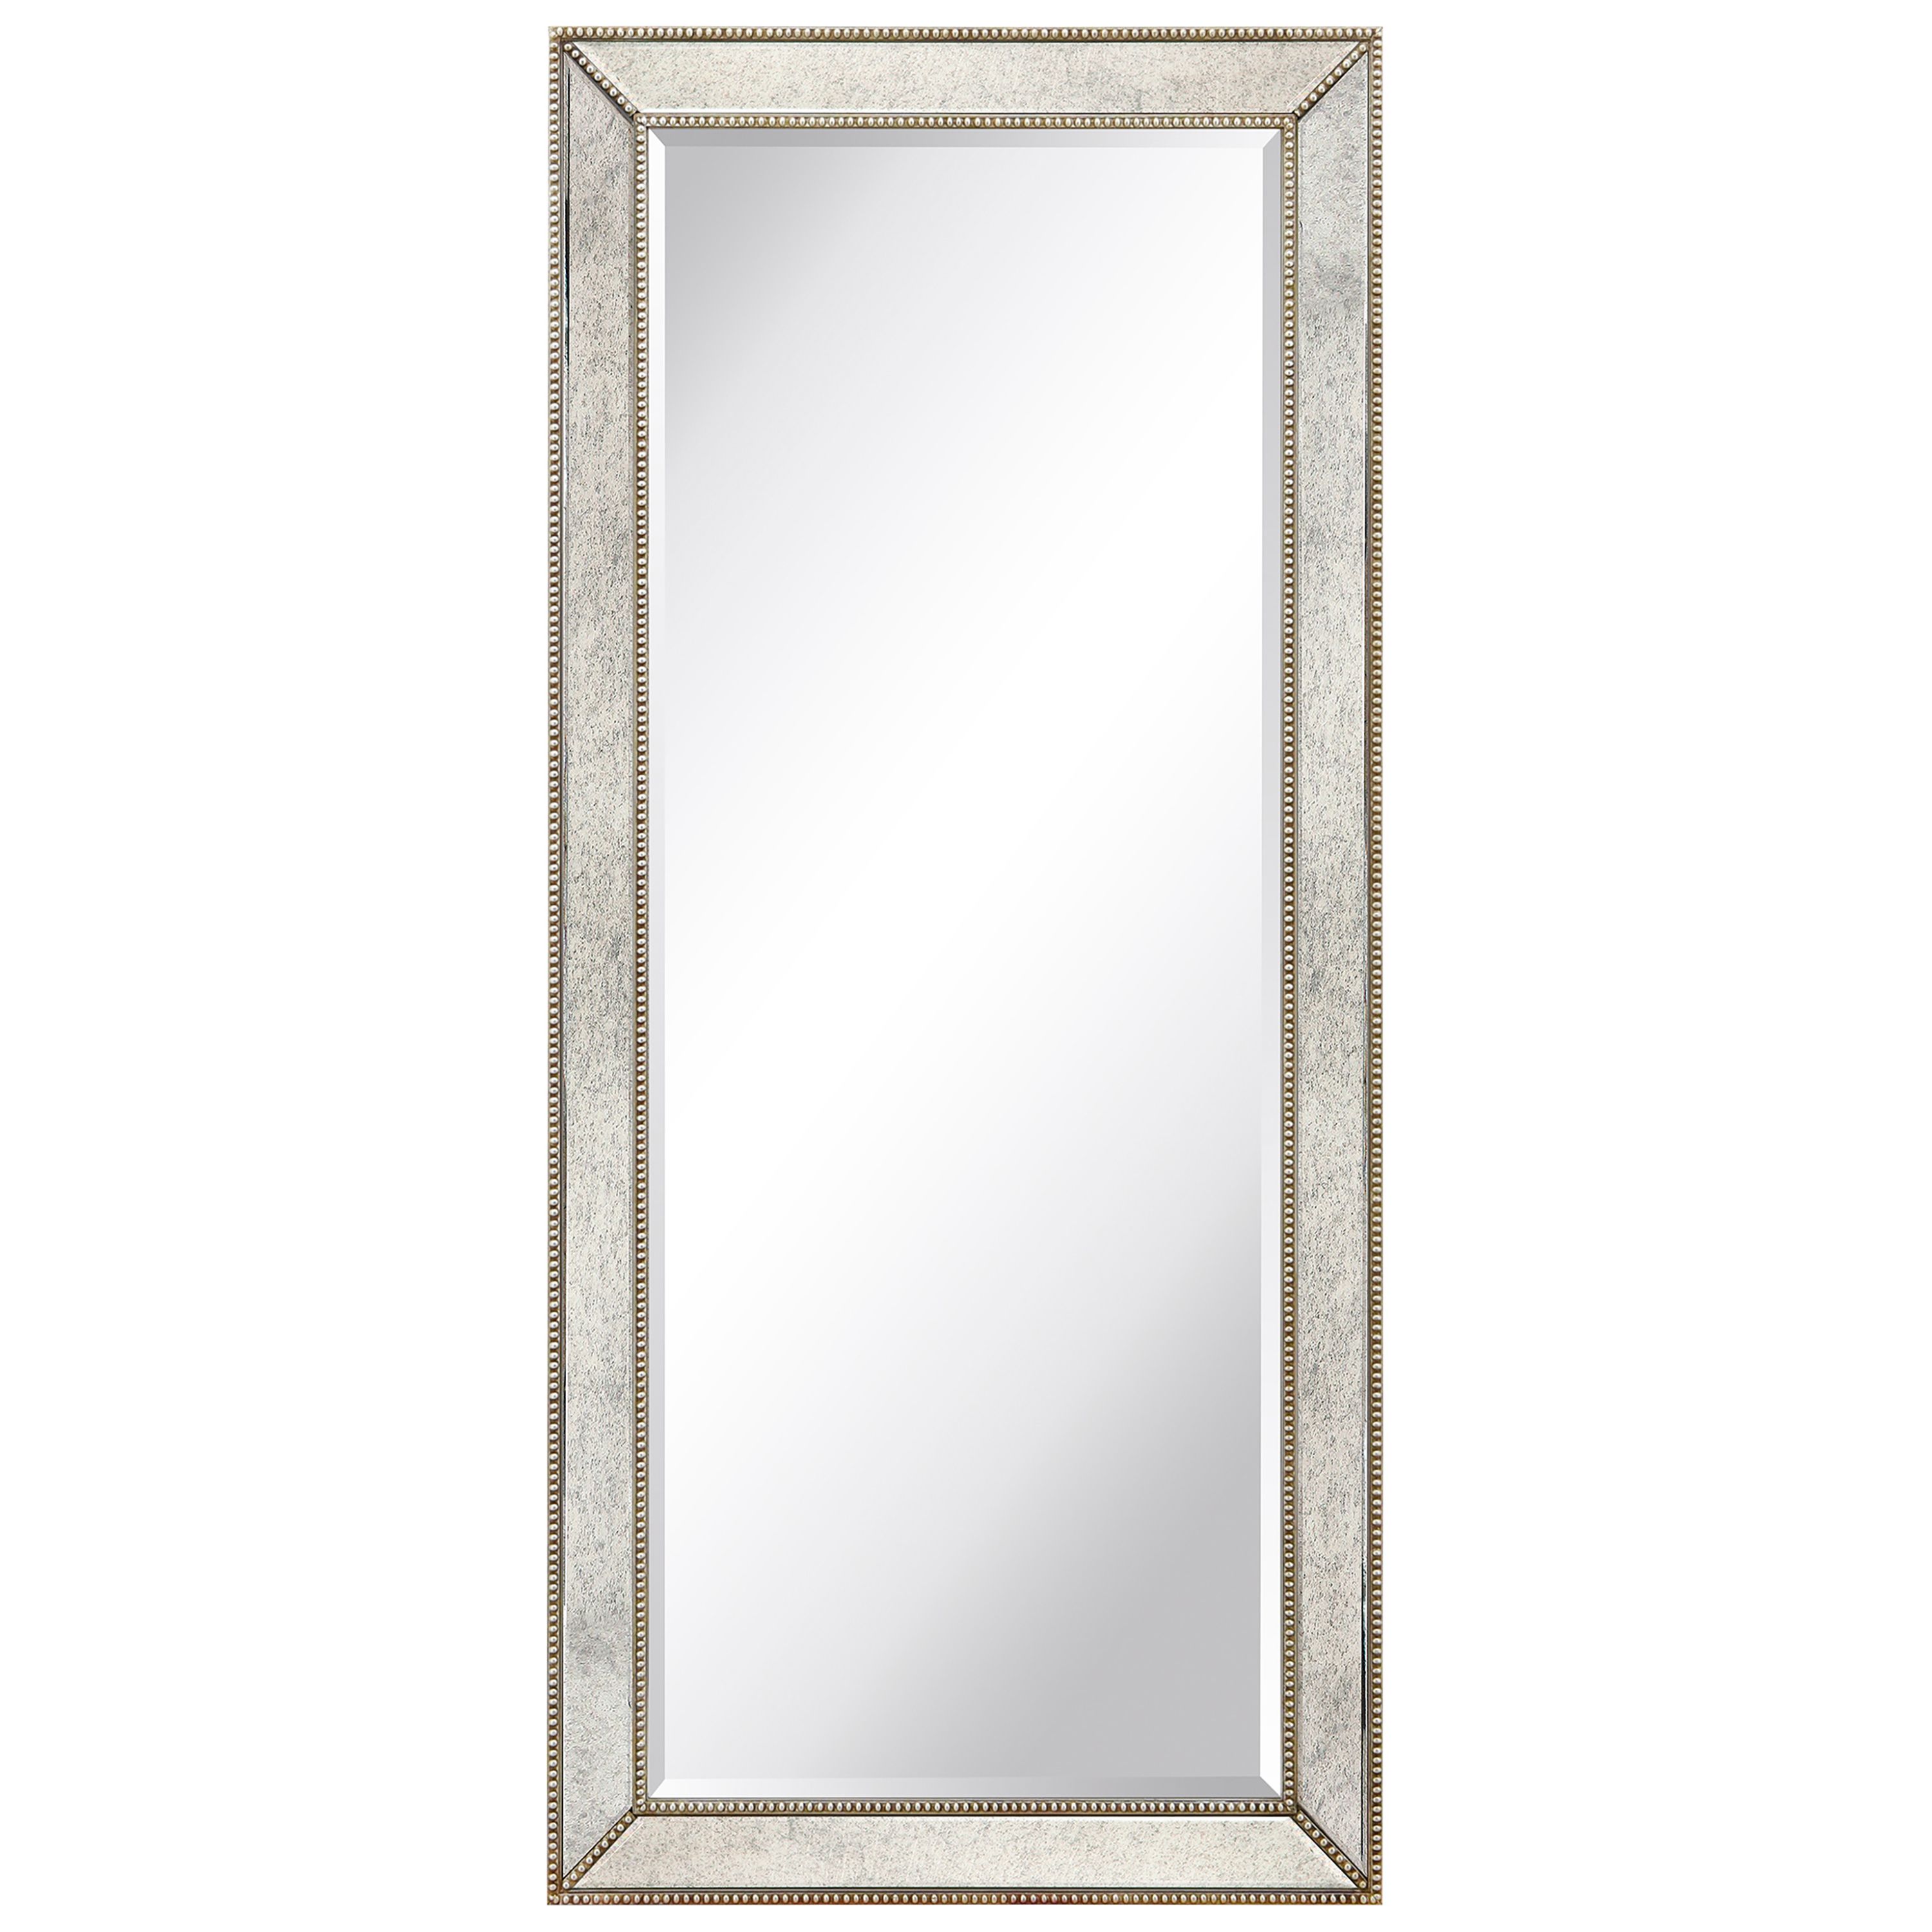 Mom-20210anp-2454 24 X 54 In. Solid Wood Frame Covered Wall Mirror With Beveled Antique Mirror Panels - 1 In. Beveled Edge